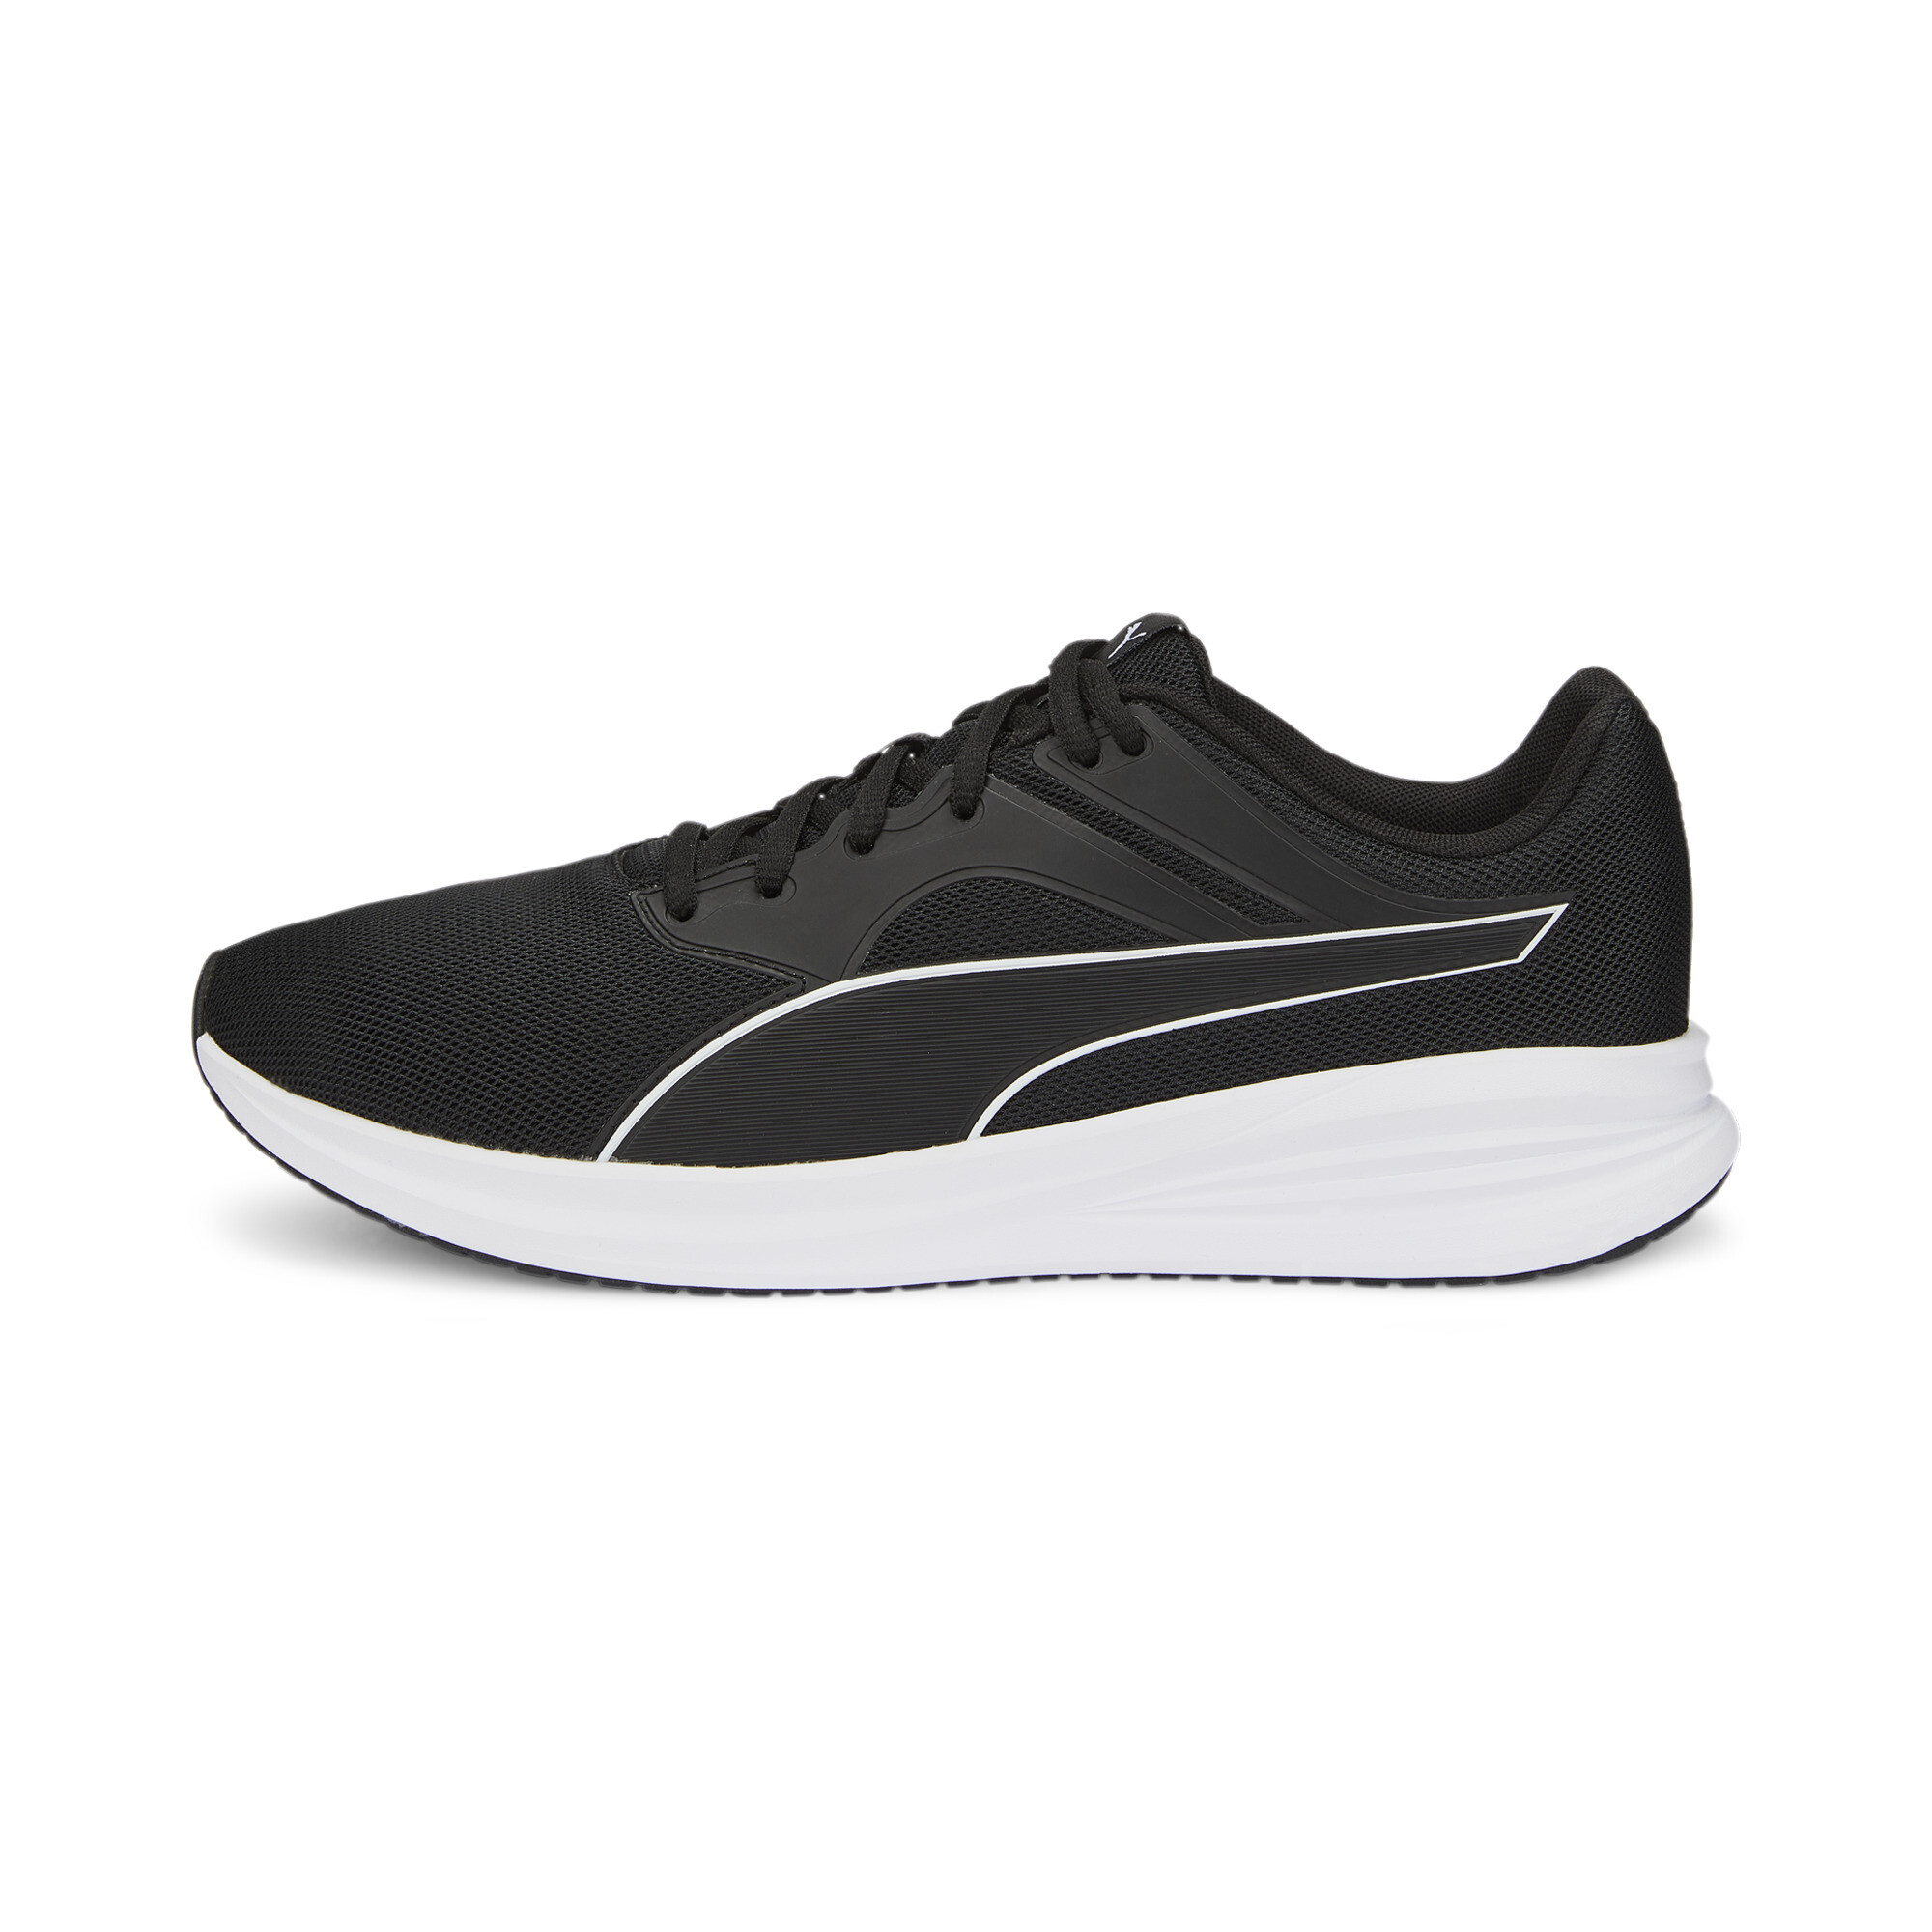 Puma Transport Running Shoes, Black, Size 39, Shoes